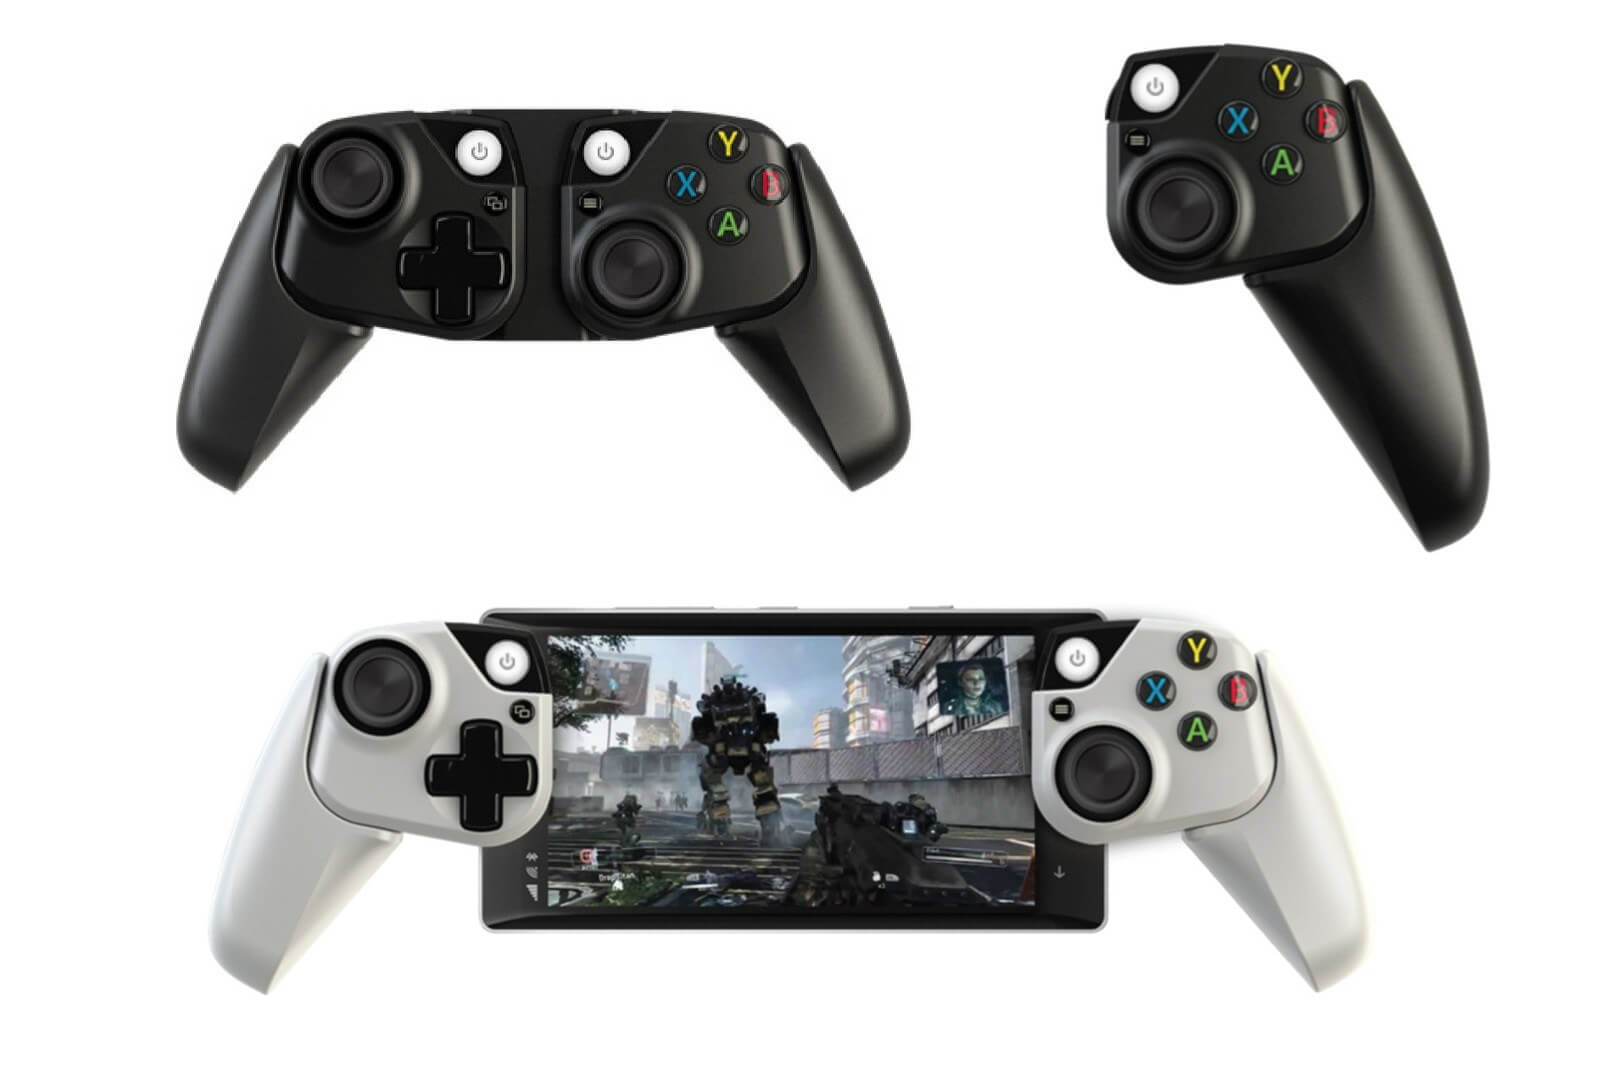 Microsoft is experimenting with controllers for mobile gaming